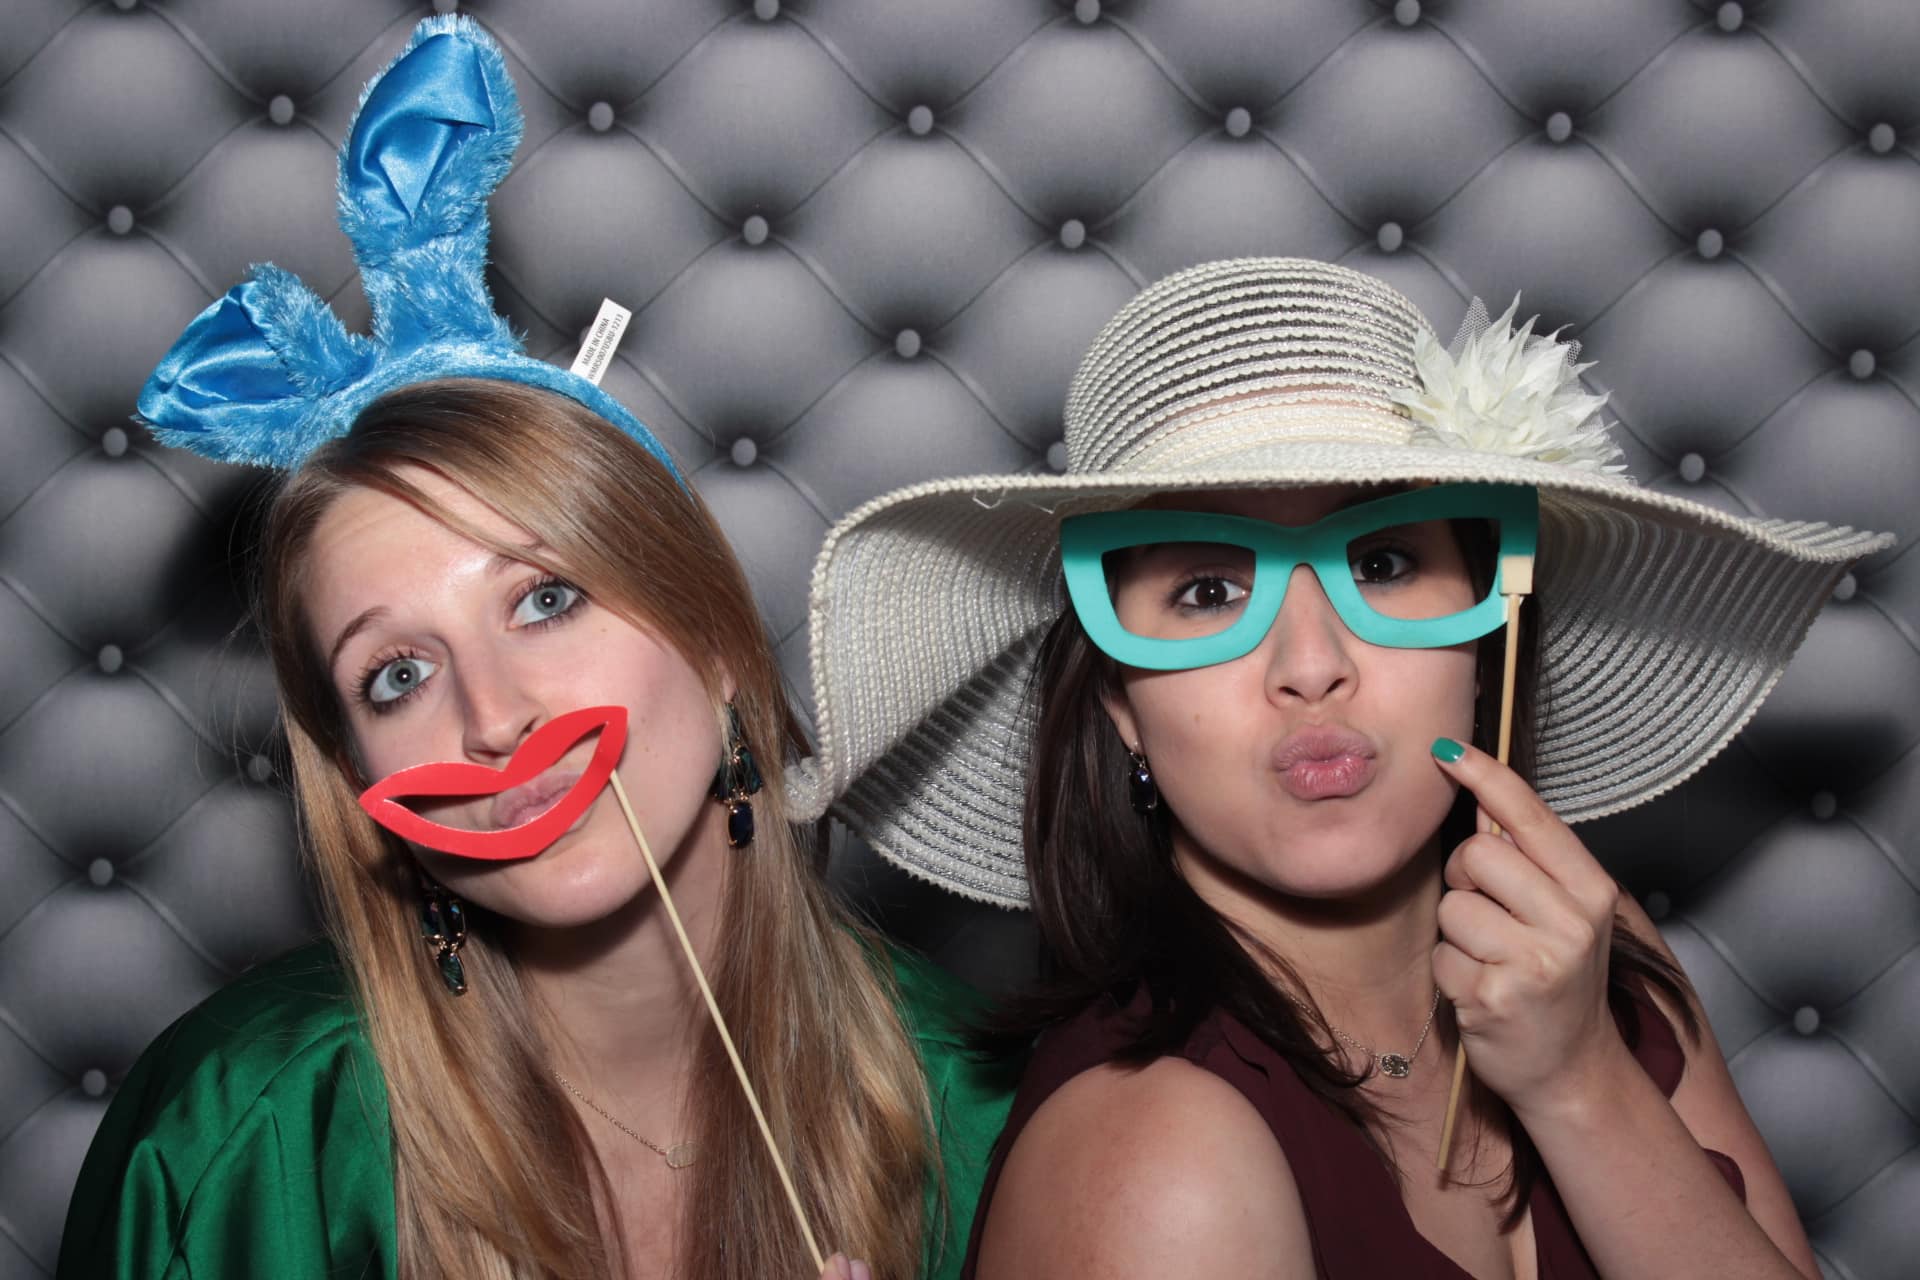 Photo-Booth-Social-Austin-Vendors-Couples-Weddings-Fun-No.1-Best-Affordable